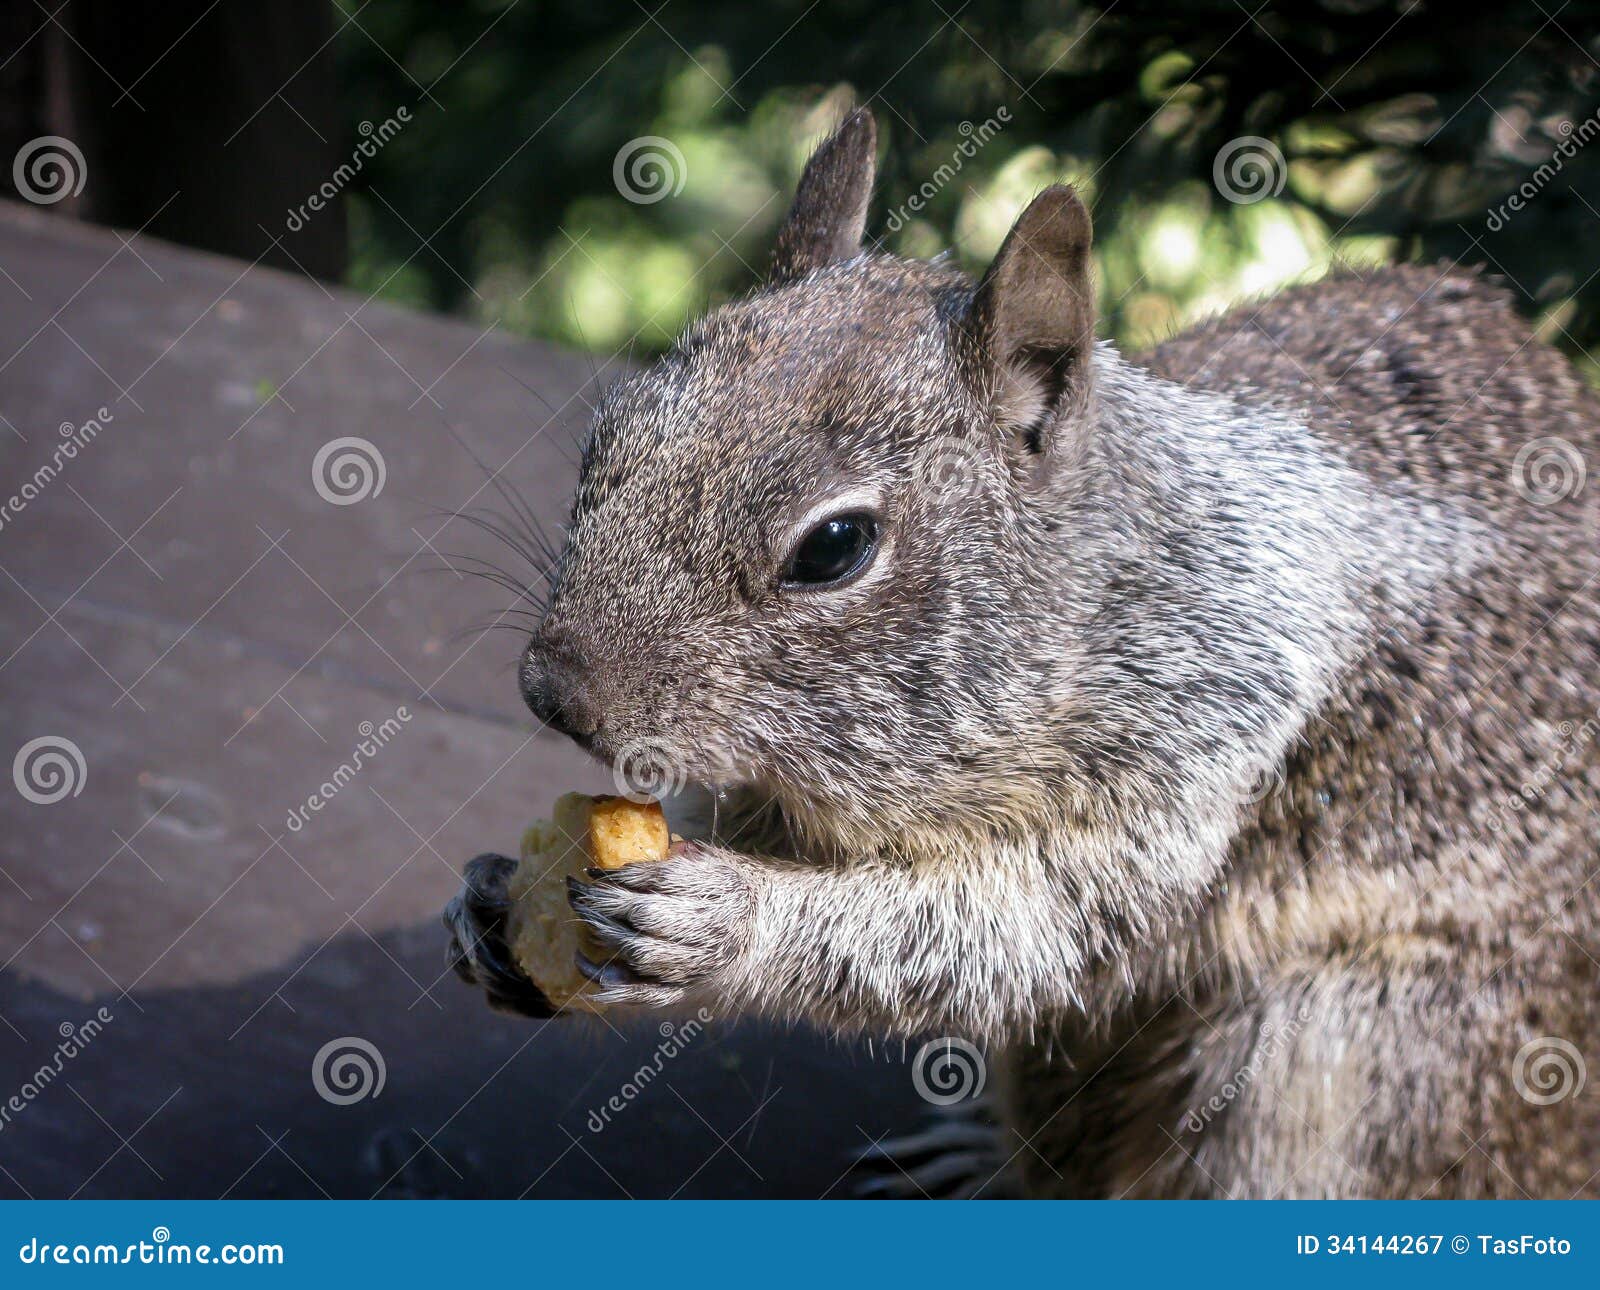 Squirrel Eating in Yosemite Valley Stock Image - Image of valley